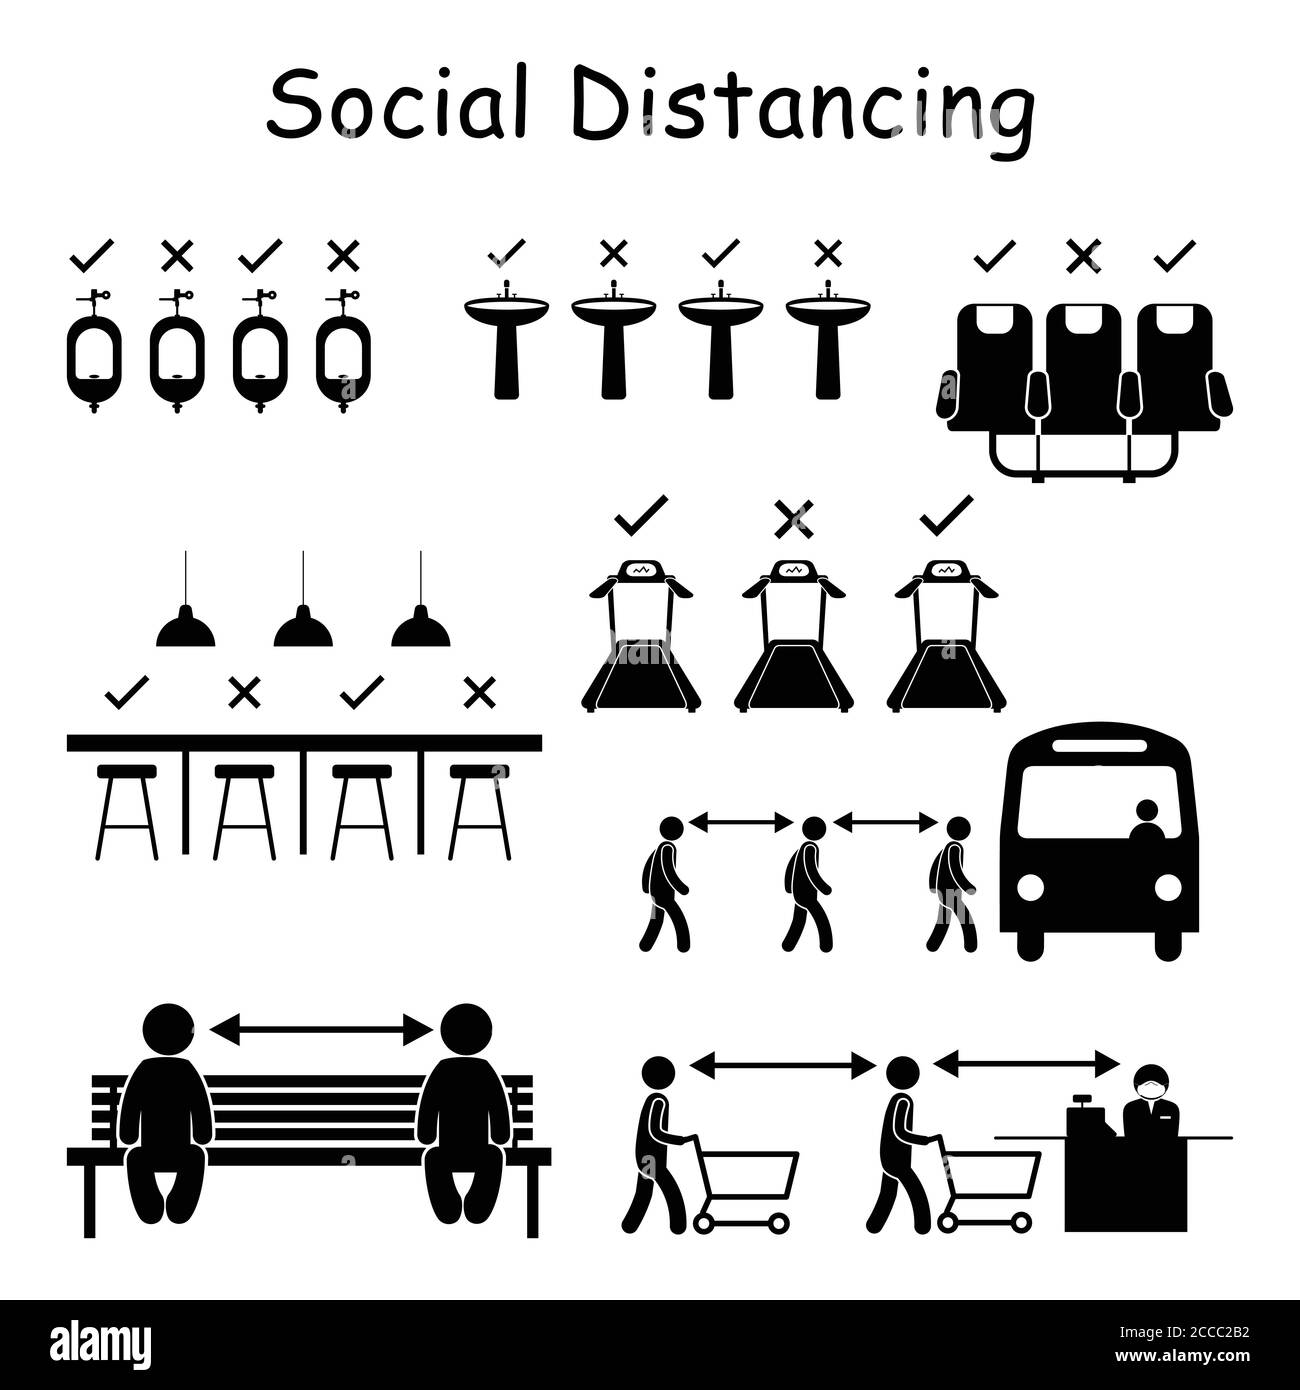 Social Distancing Signs in Public Spaces. Vector Pictogram Depicting Social Distance Practice Signs for Urinal Hand Washing Sinks Airplane Seats Bar D Stock Vector